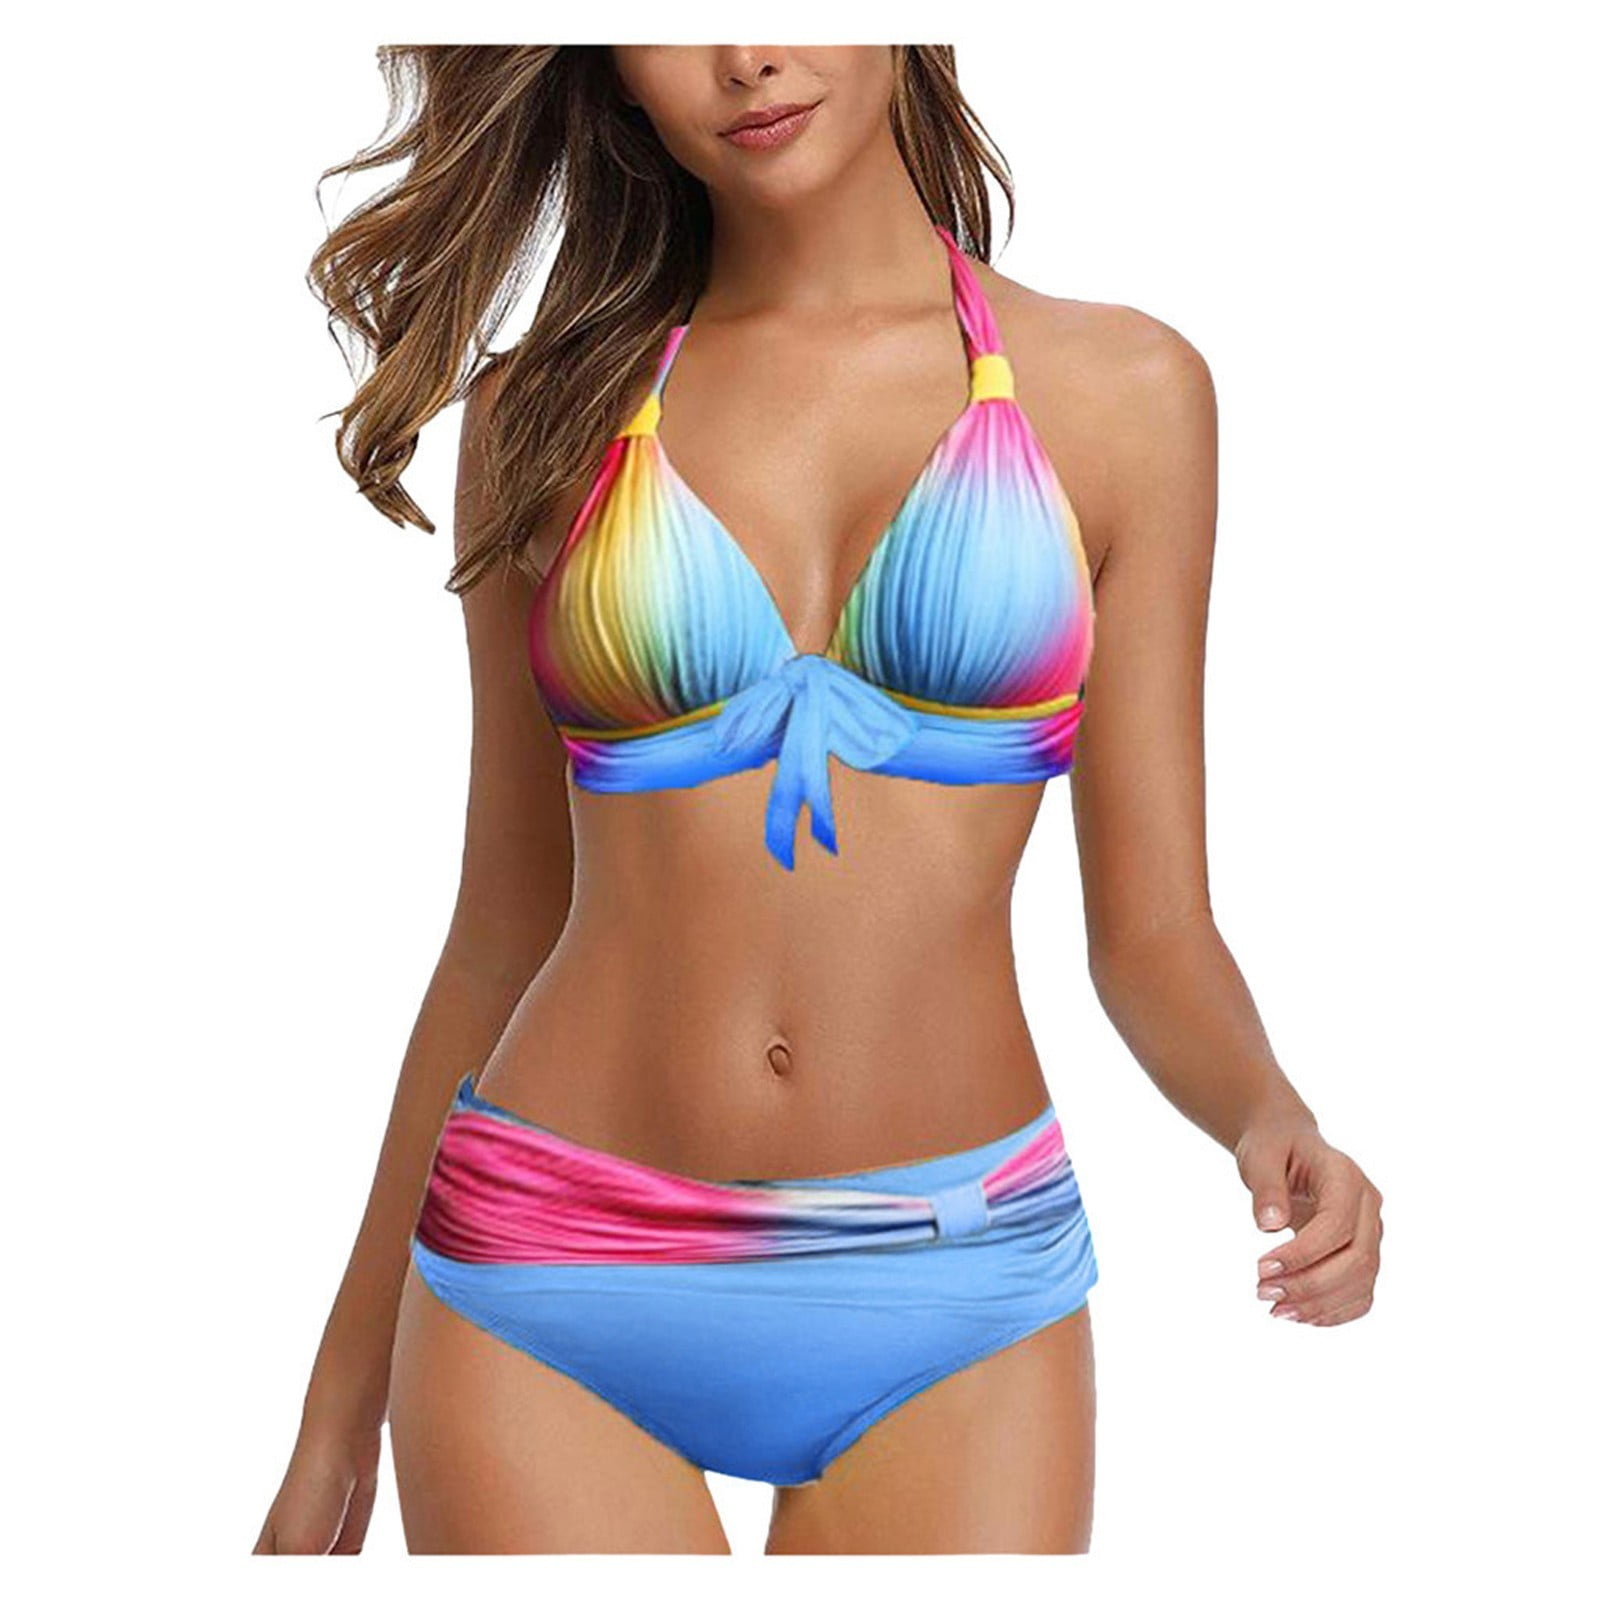 Lap Swimming Suit for Women Two Piece Bra Bathing Suit Tops for